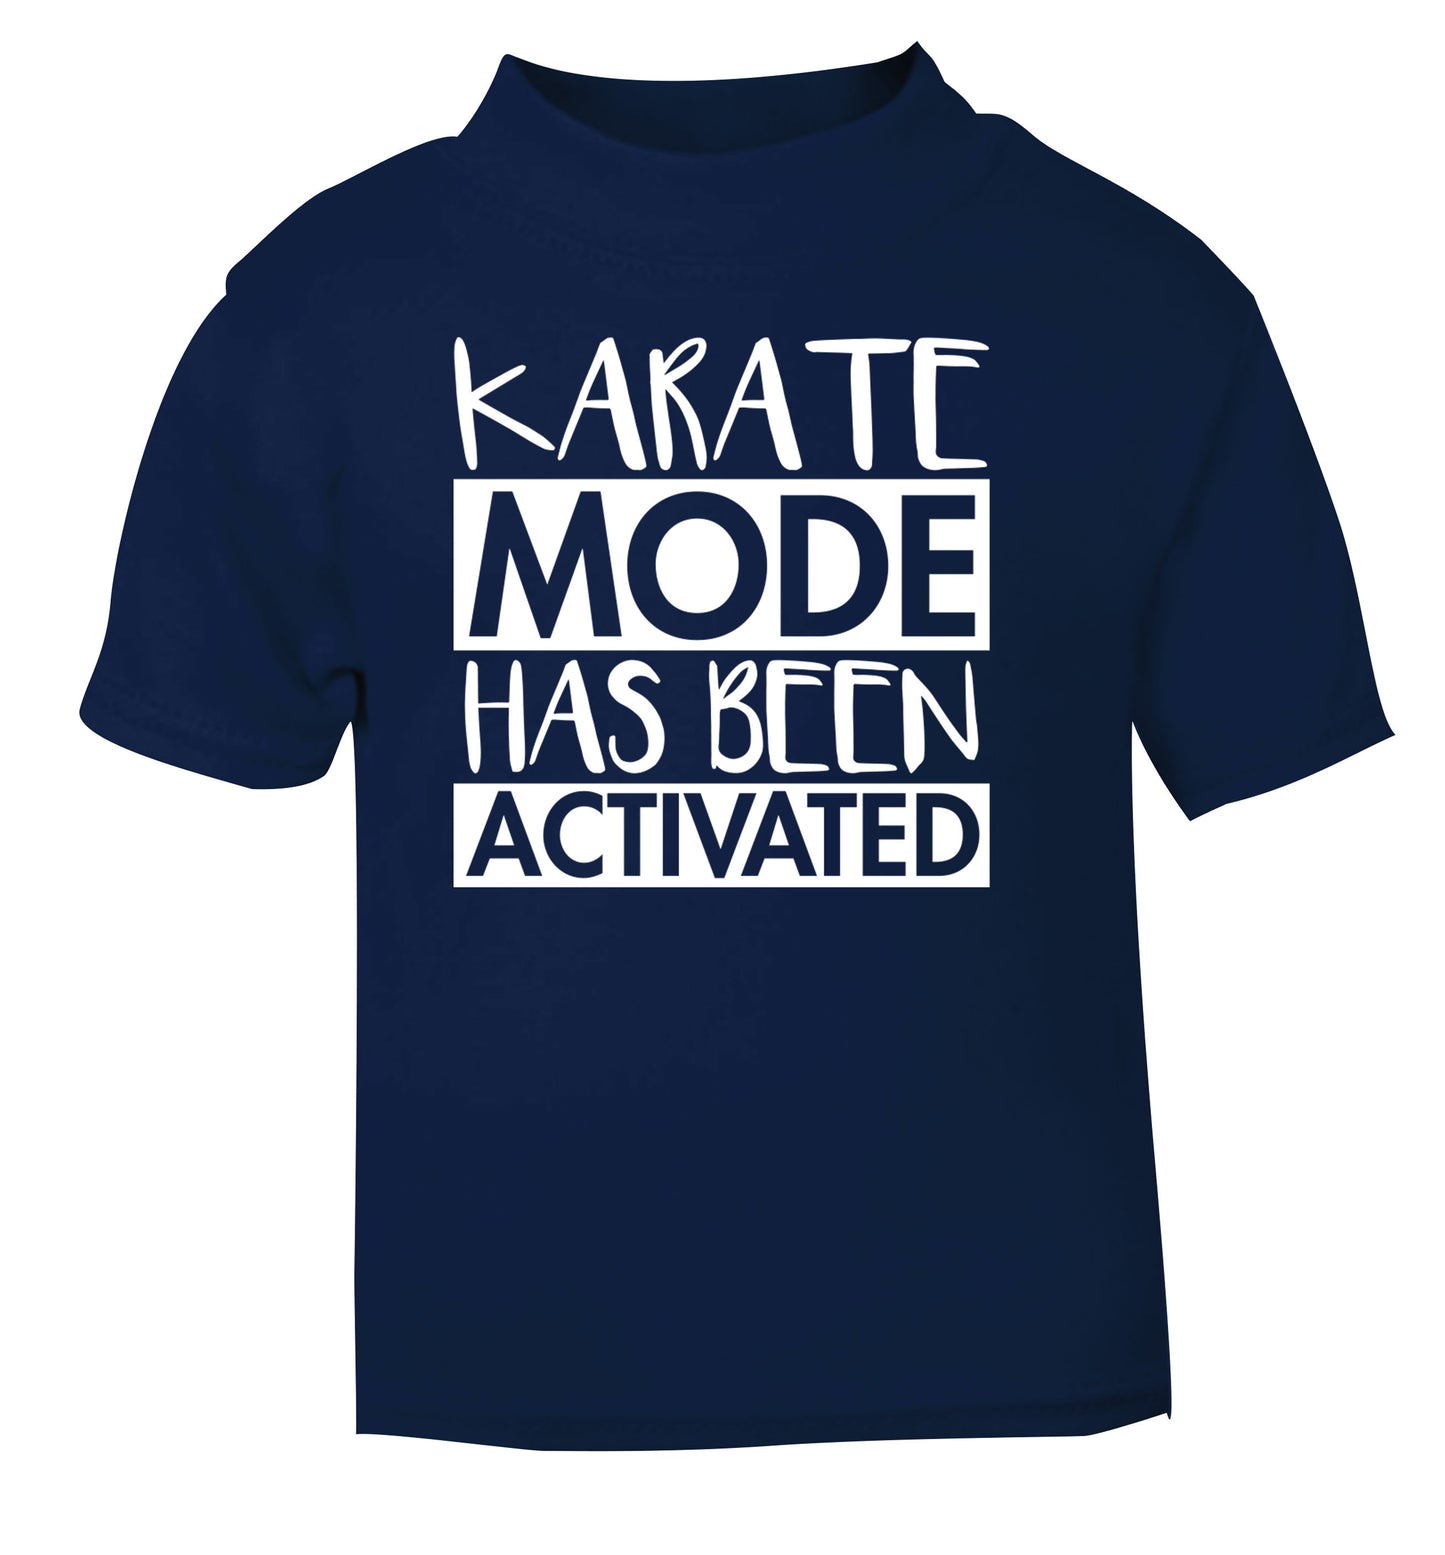 Karate mode activated navy Baby Toddler Tshirt 2 Years